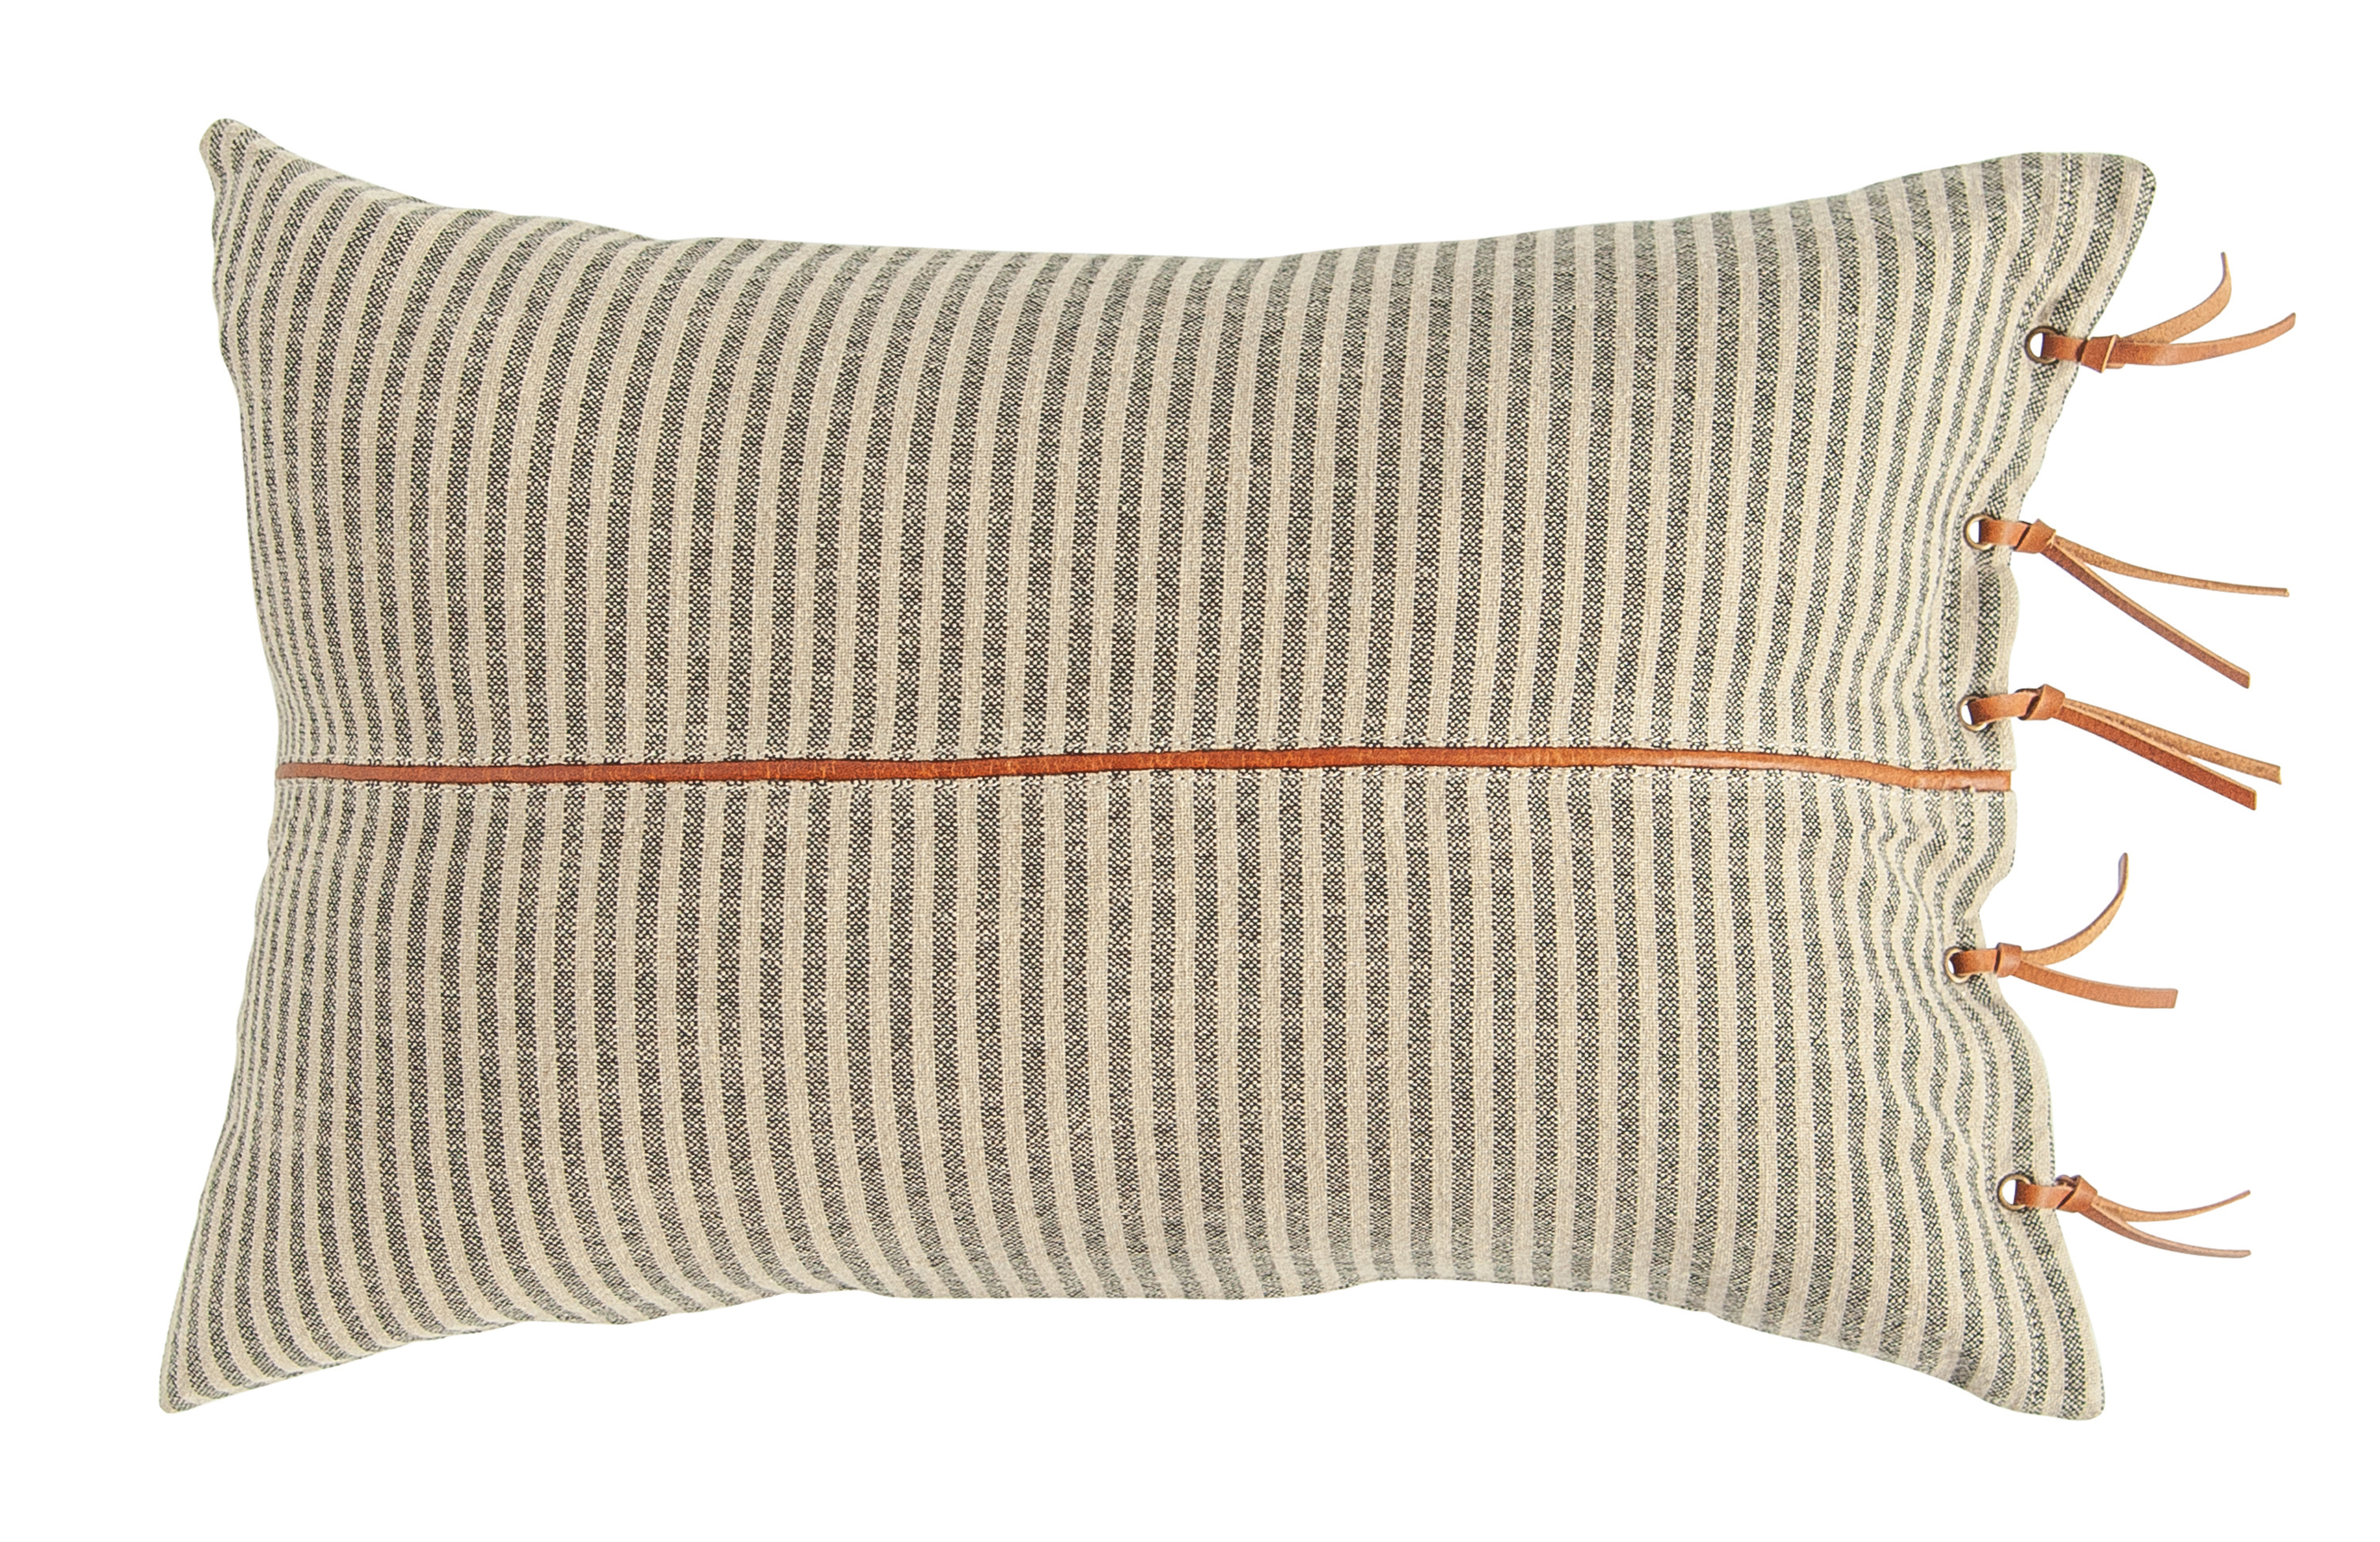 Beige & Black Striped Cotton Ticking Lumbar Pillow with Leather Trim - Nomad Home